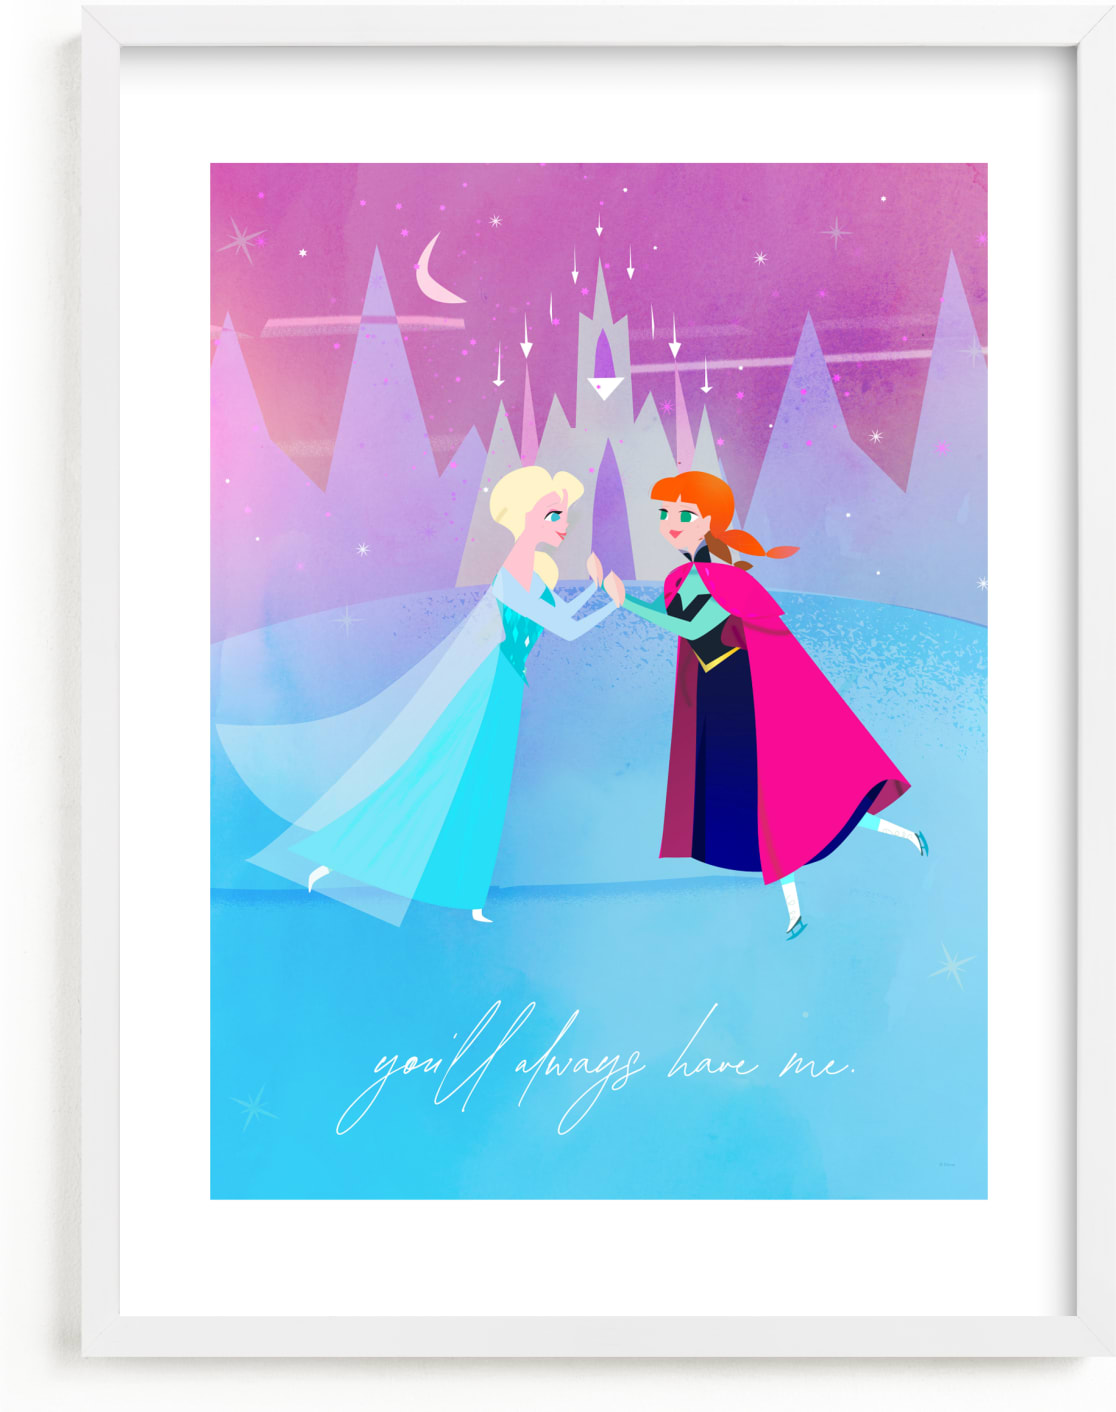 This is a blue disney art by Lori Wemple called Elsa and Anna from Disney's Frozen.